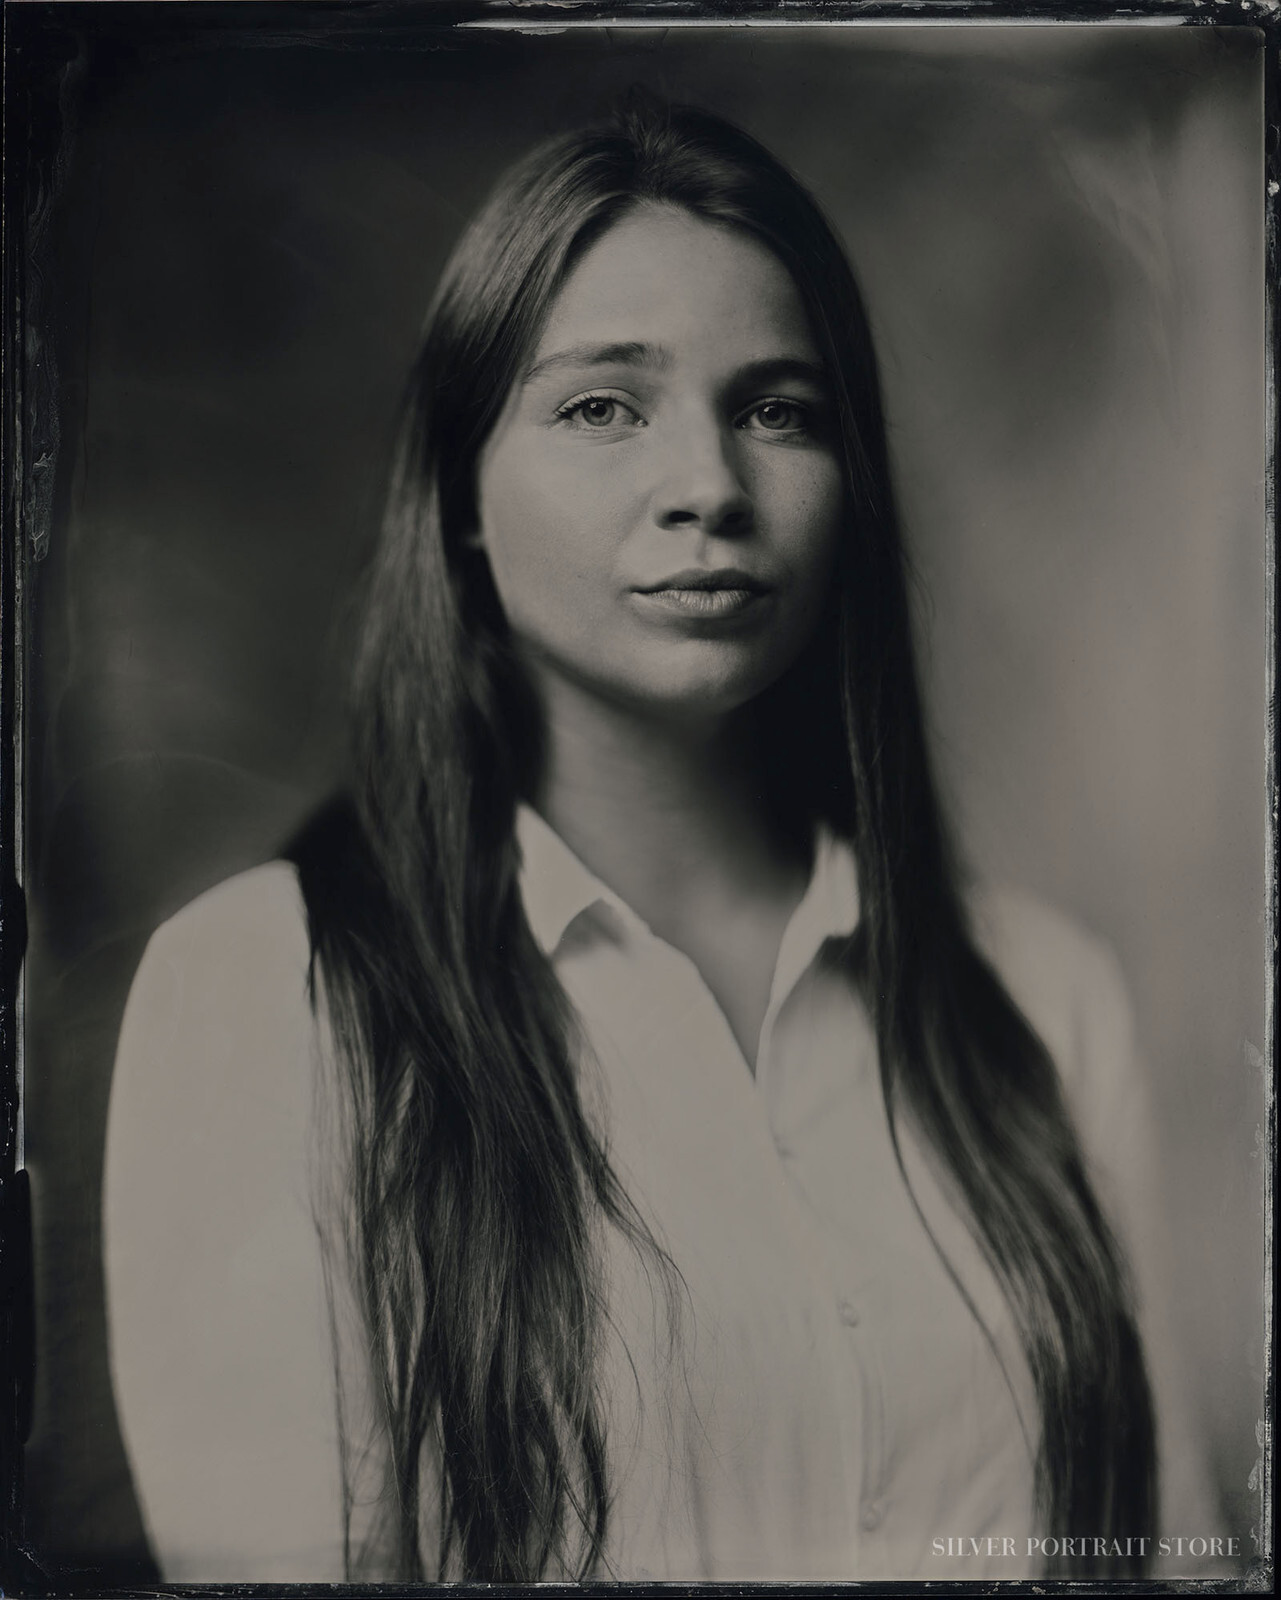 Sophie-Silver Portrait Store-scan from Wet plate collodion-Tintype 20 x 25 cm.